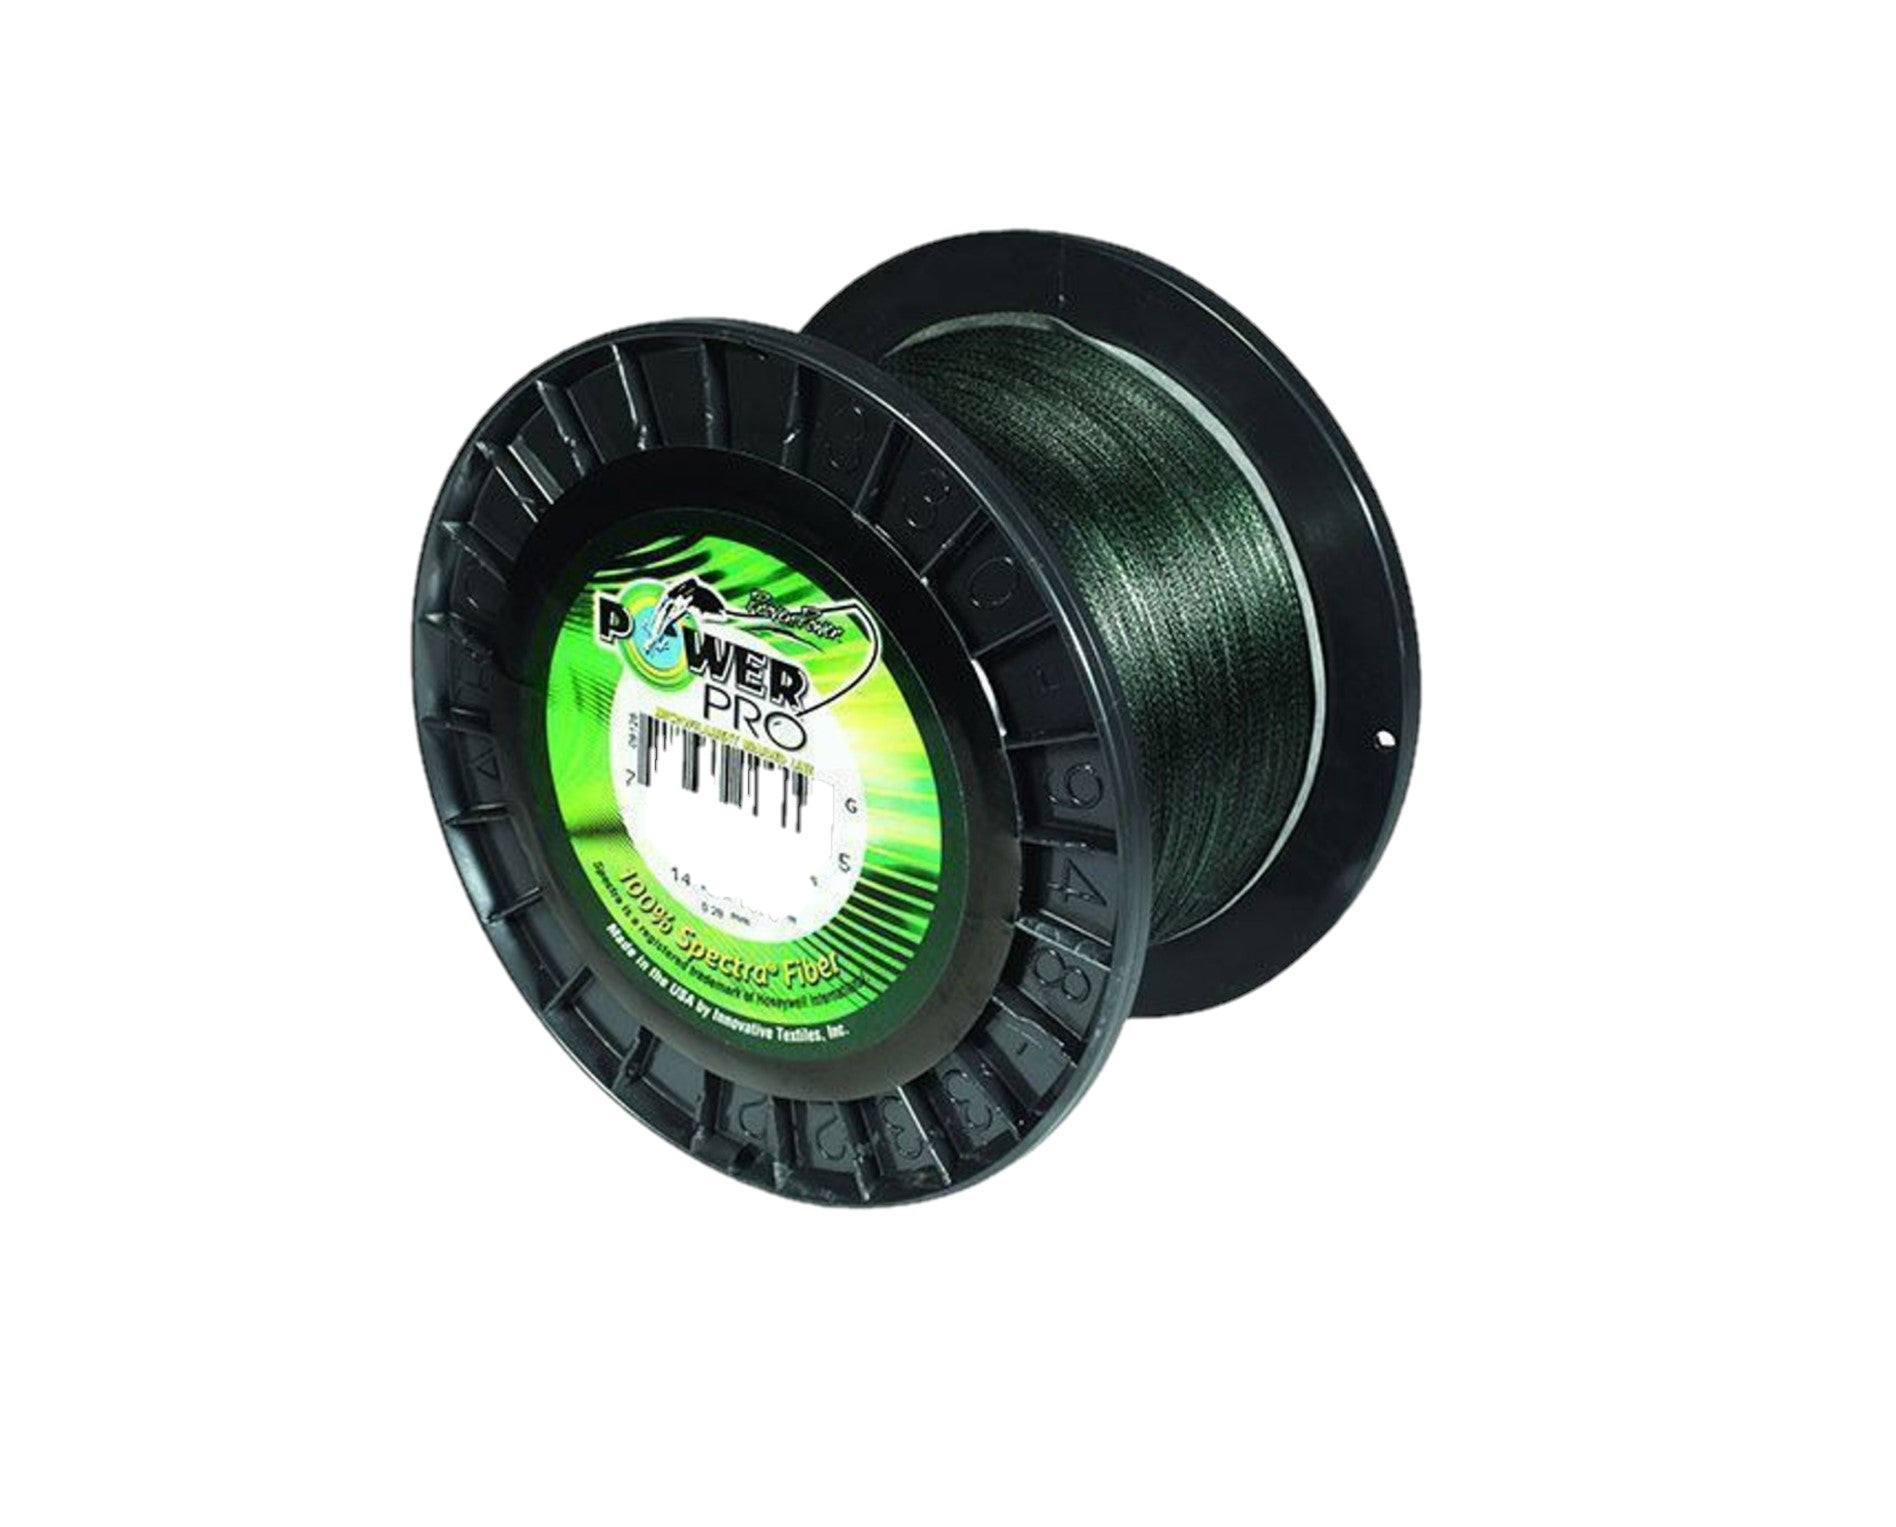 Braided Line 30lb 150 yrd - SPOOLED ONLY with purchase of reel